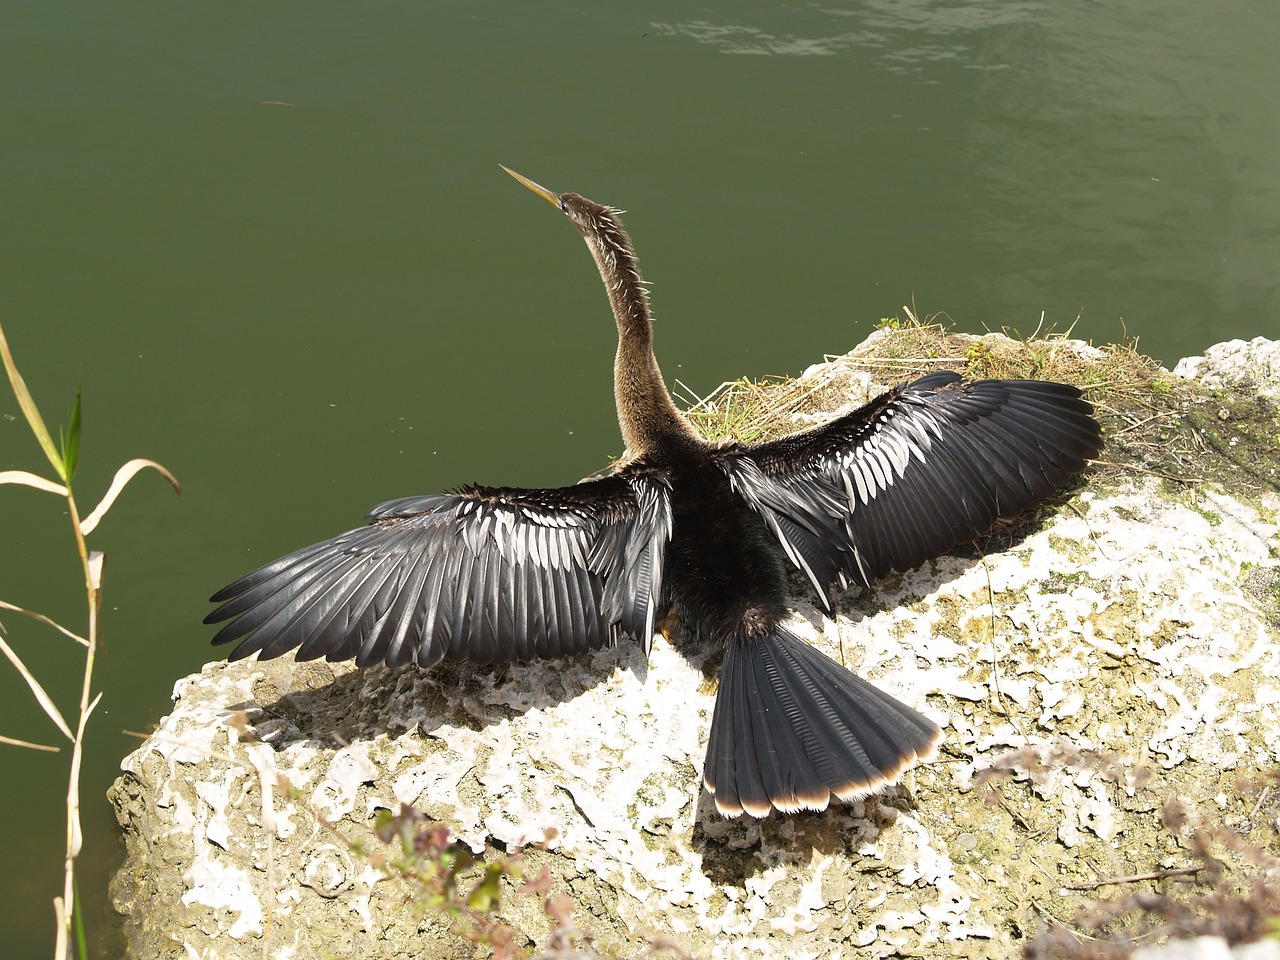 A water bird with wings outstretched.